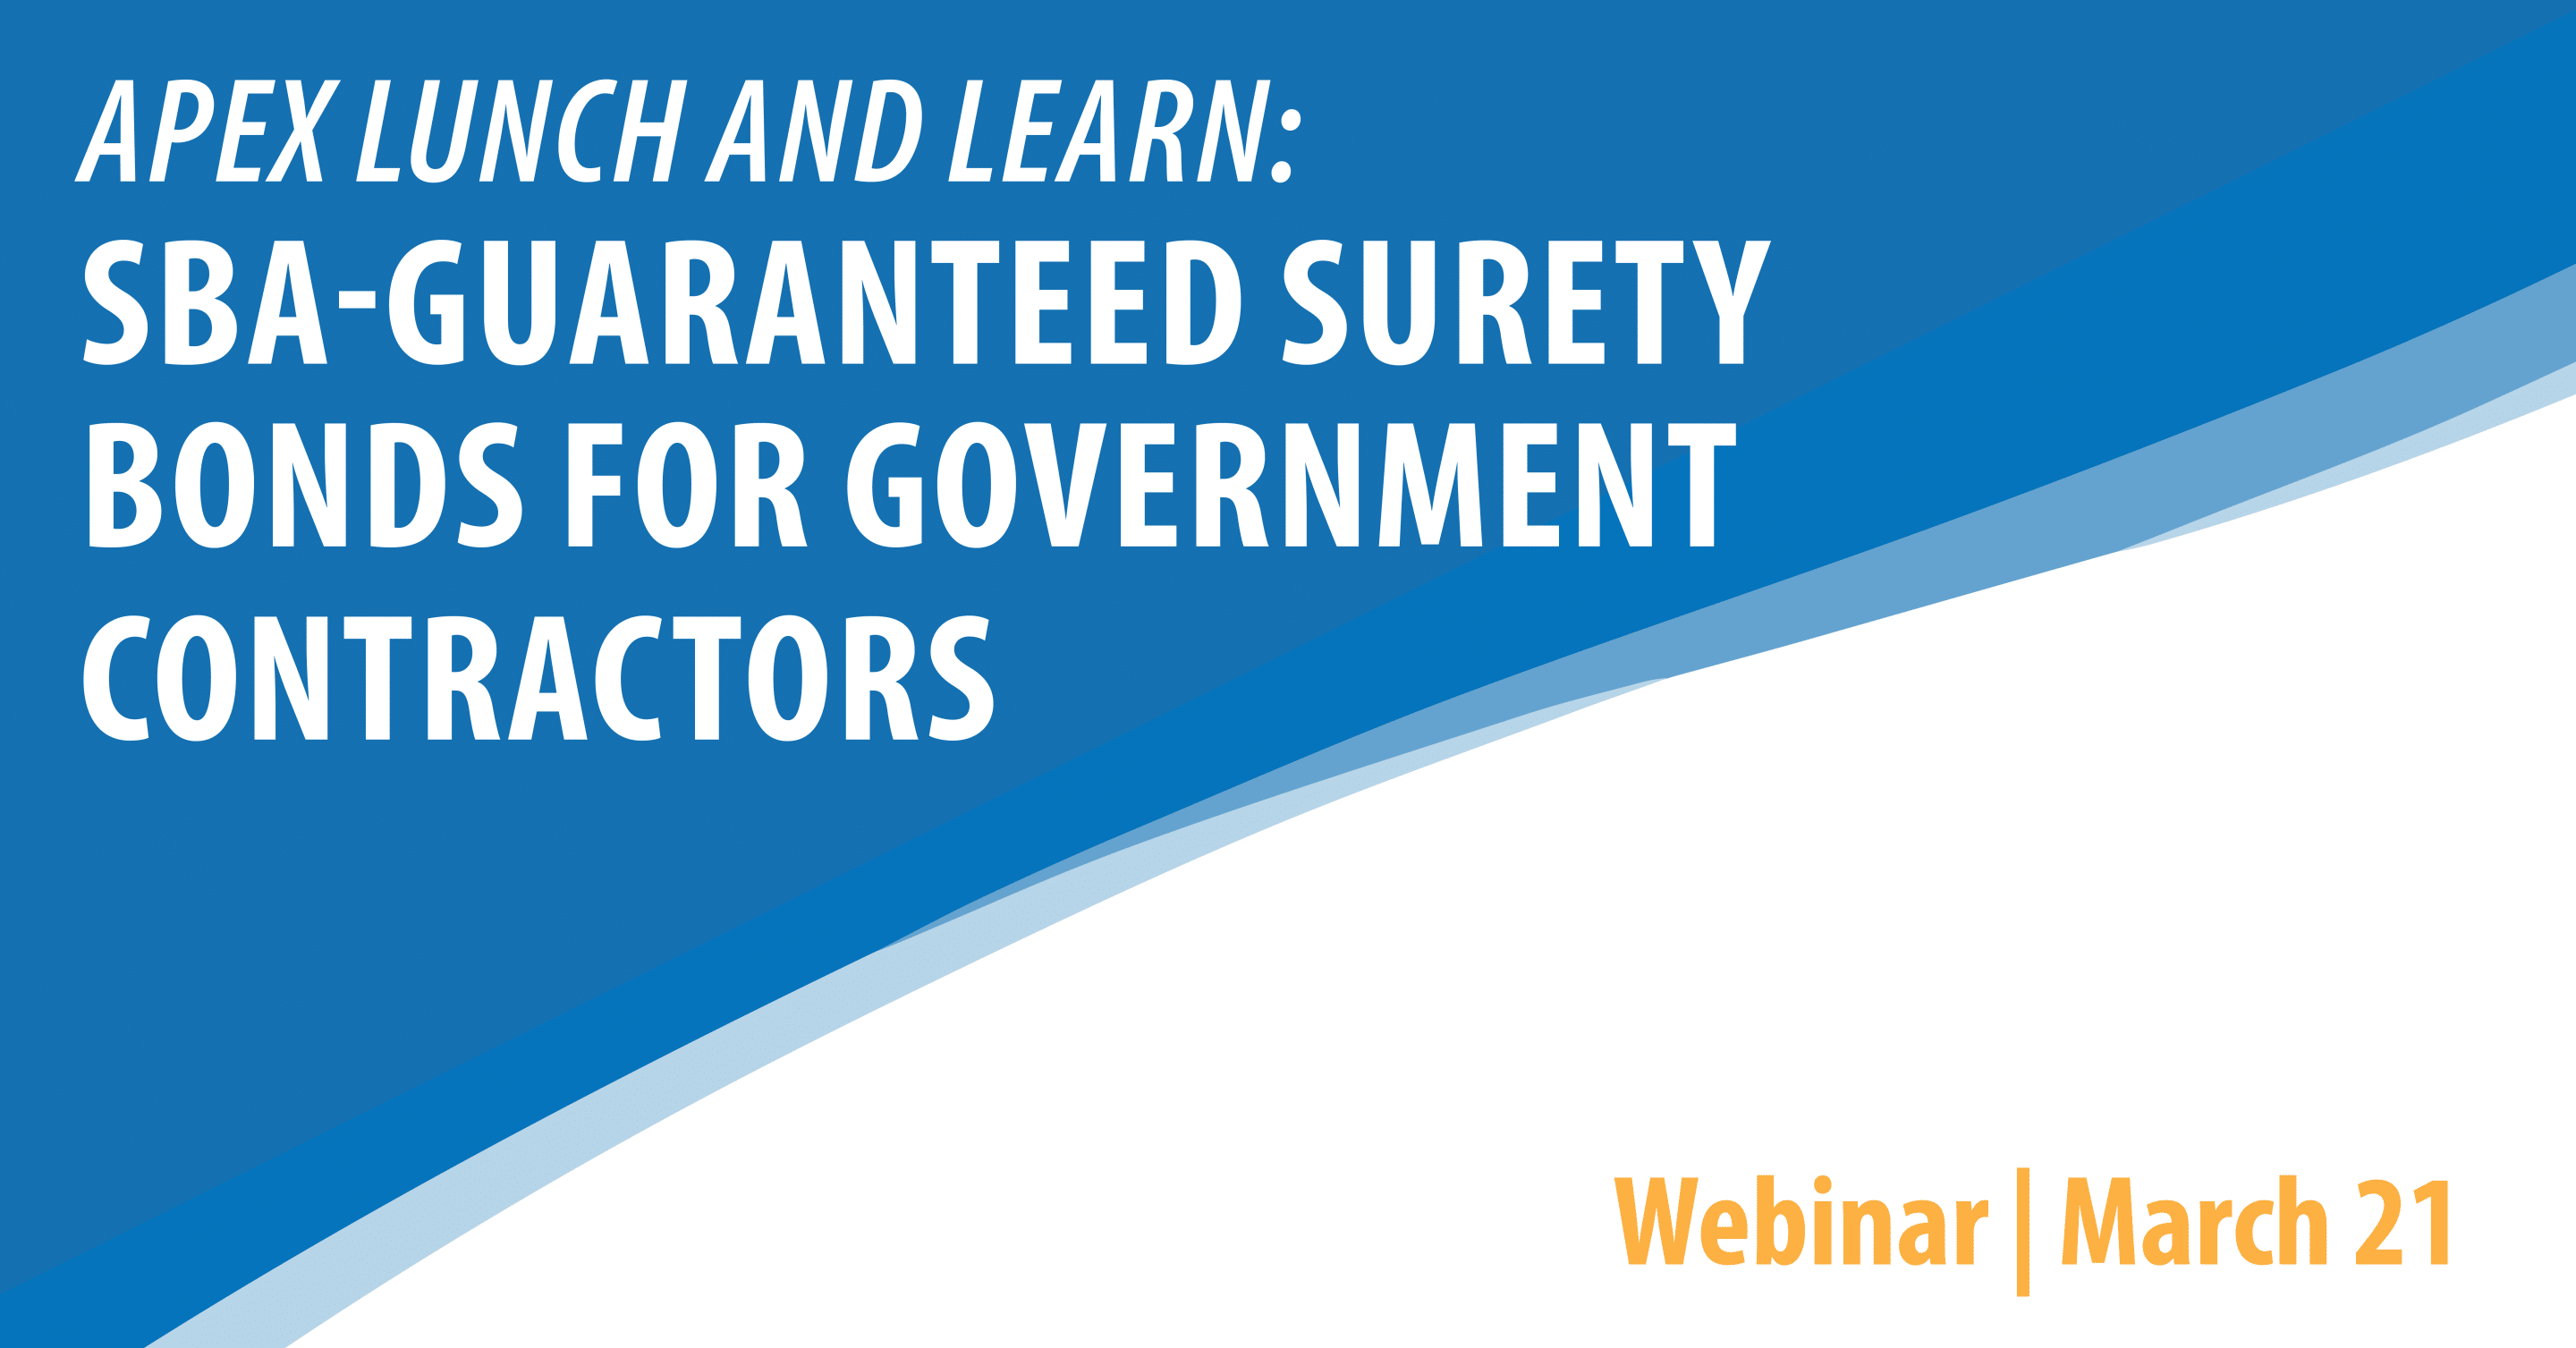 APEX Lunch and Learn: SBA-Guaranteed Surety Bonds for Government Contractors